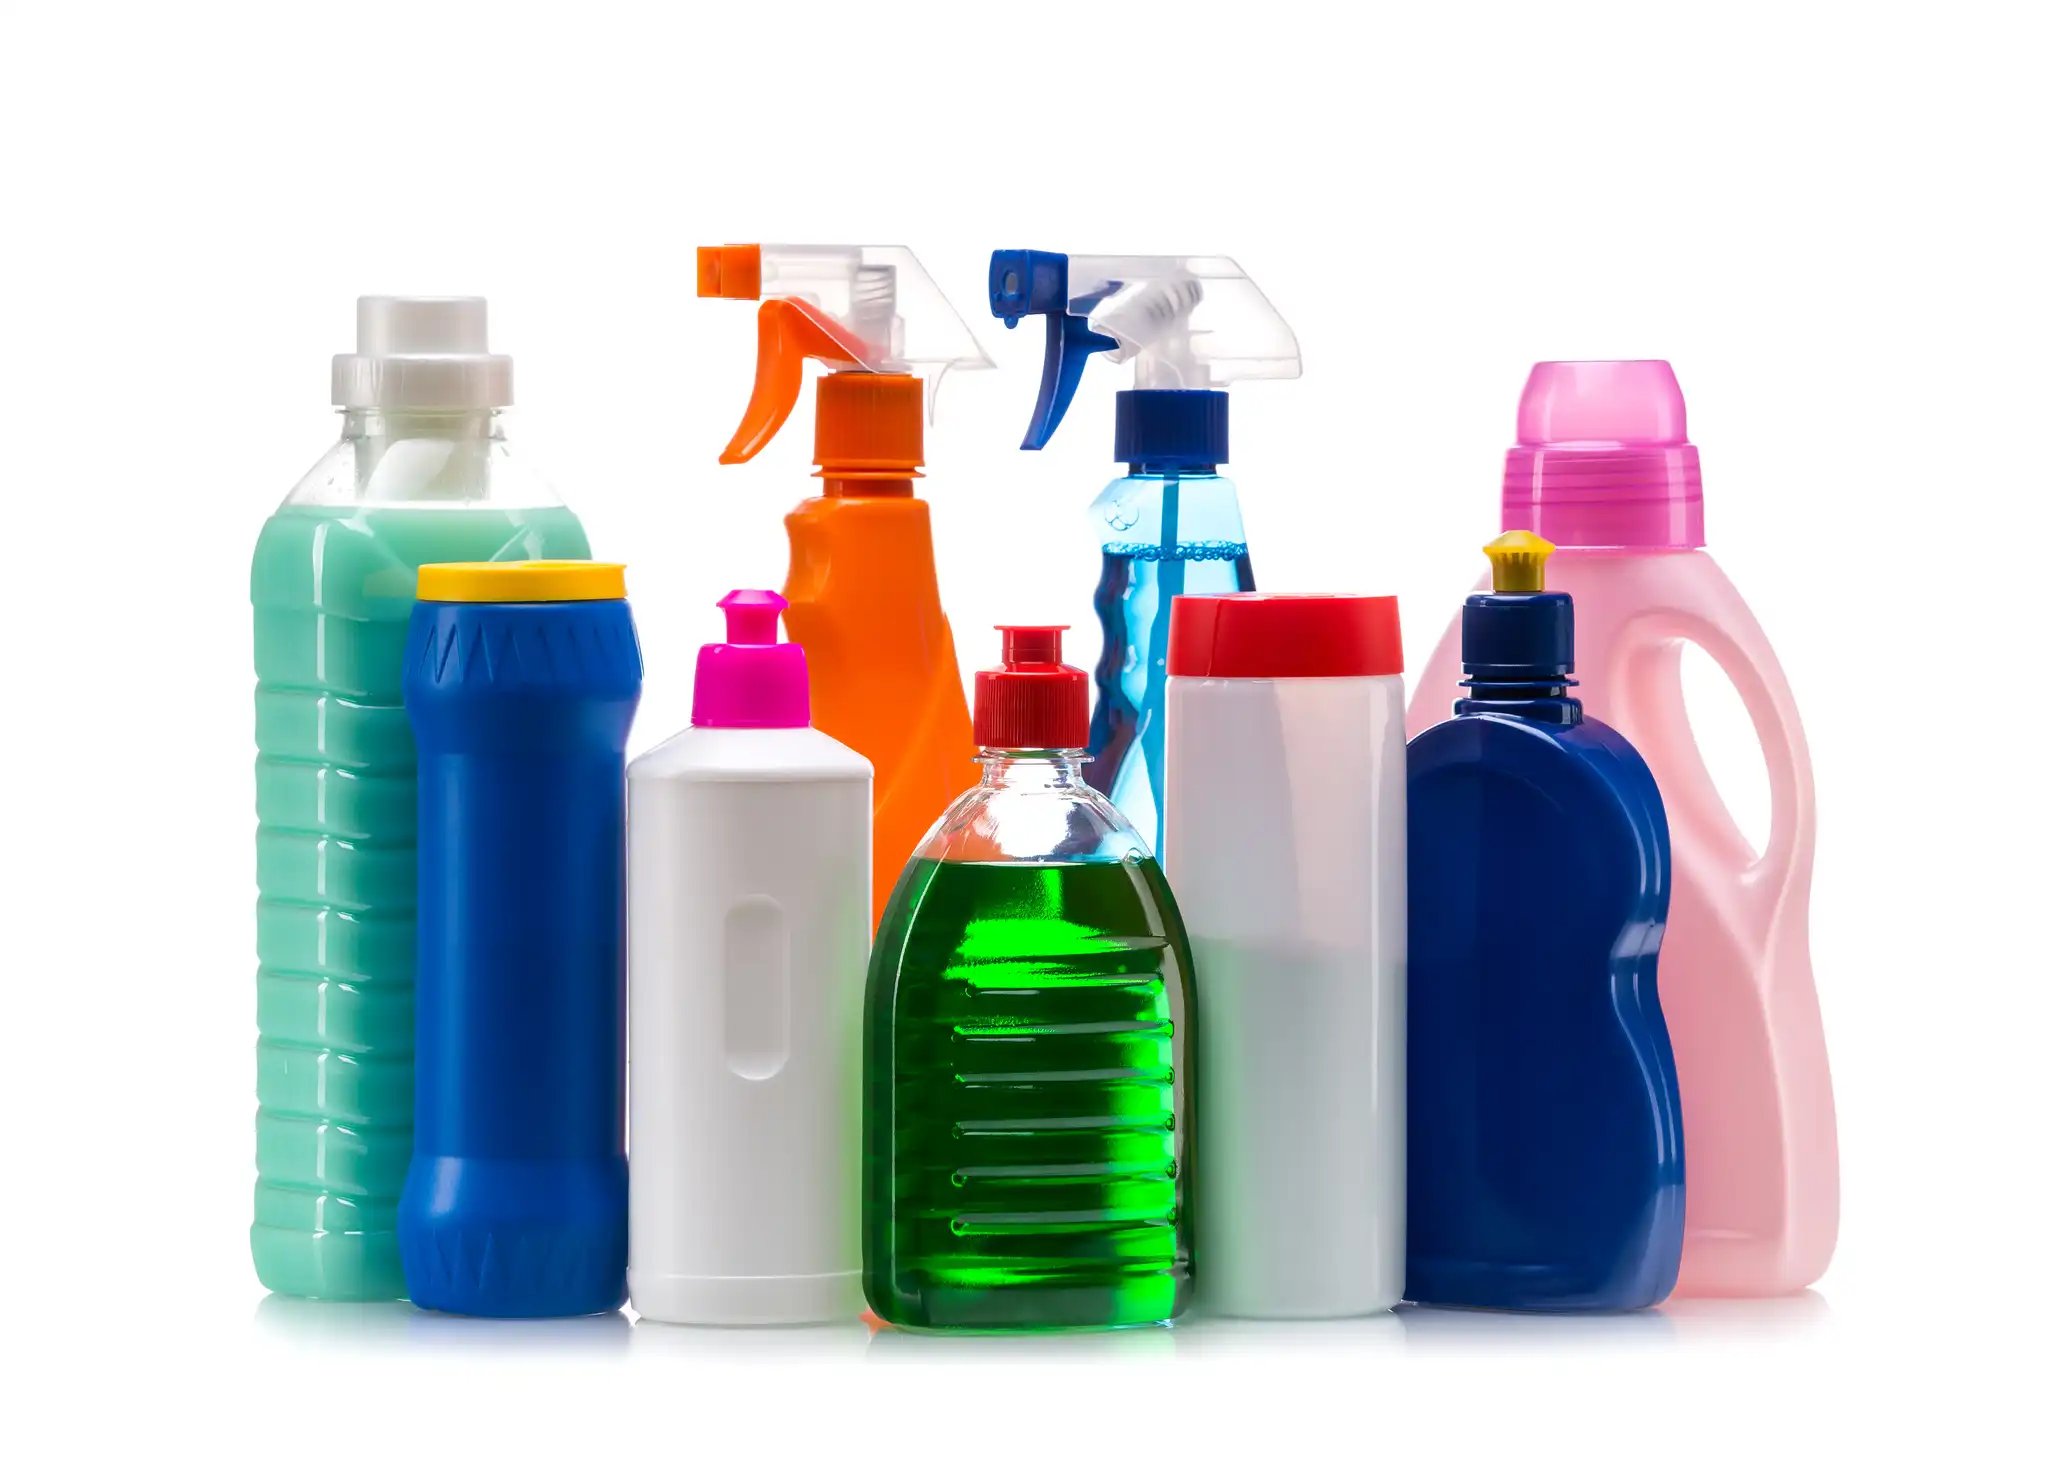 Household Goods Industry - Cleaning products